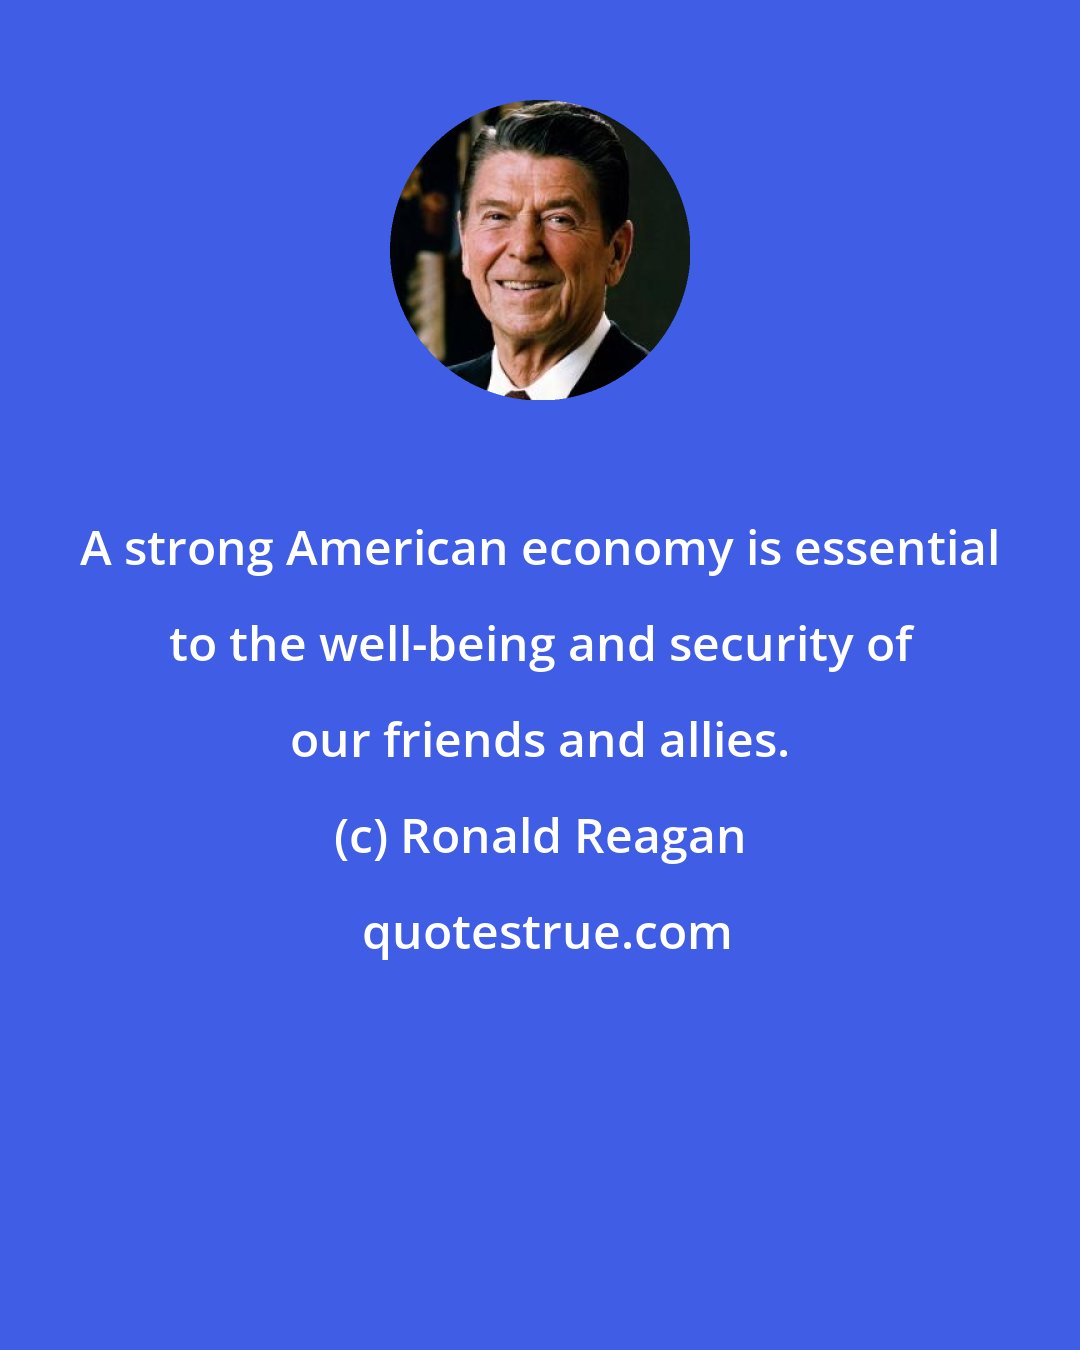 Ronald Reagan: A strong American economy is essential to the well-being and security of our friends and allies.